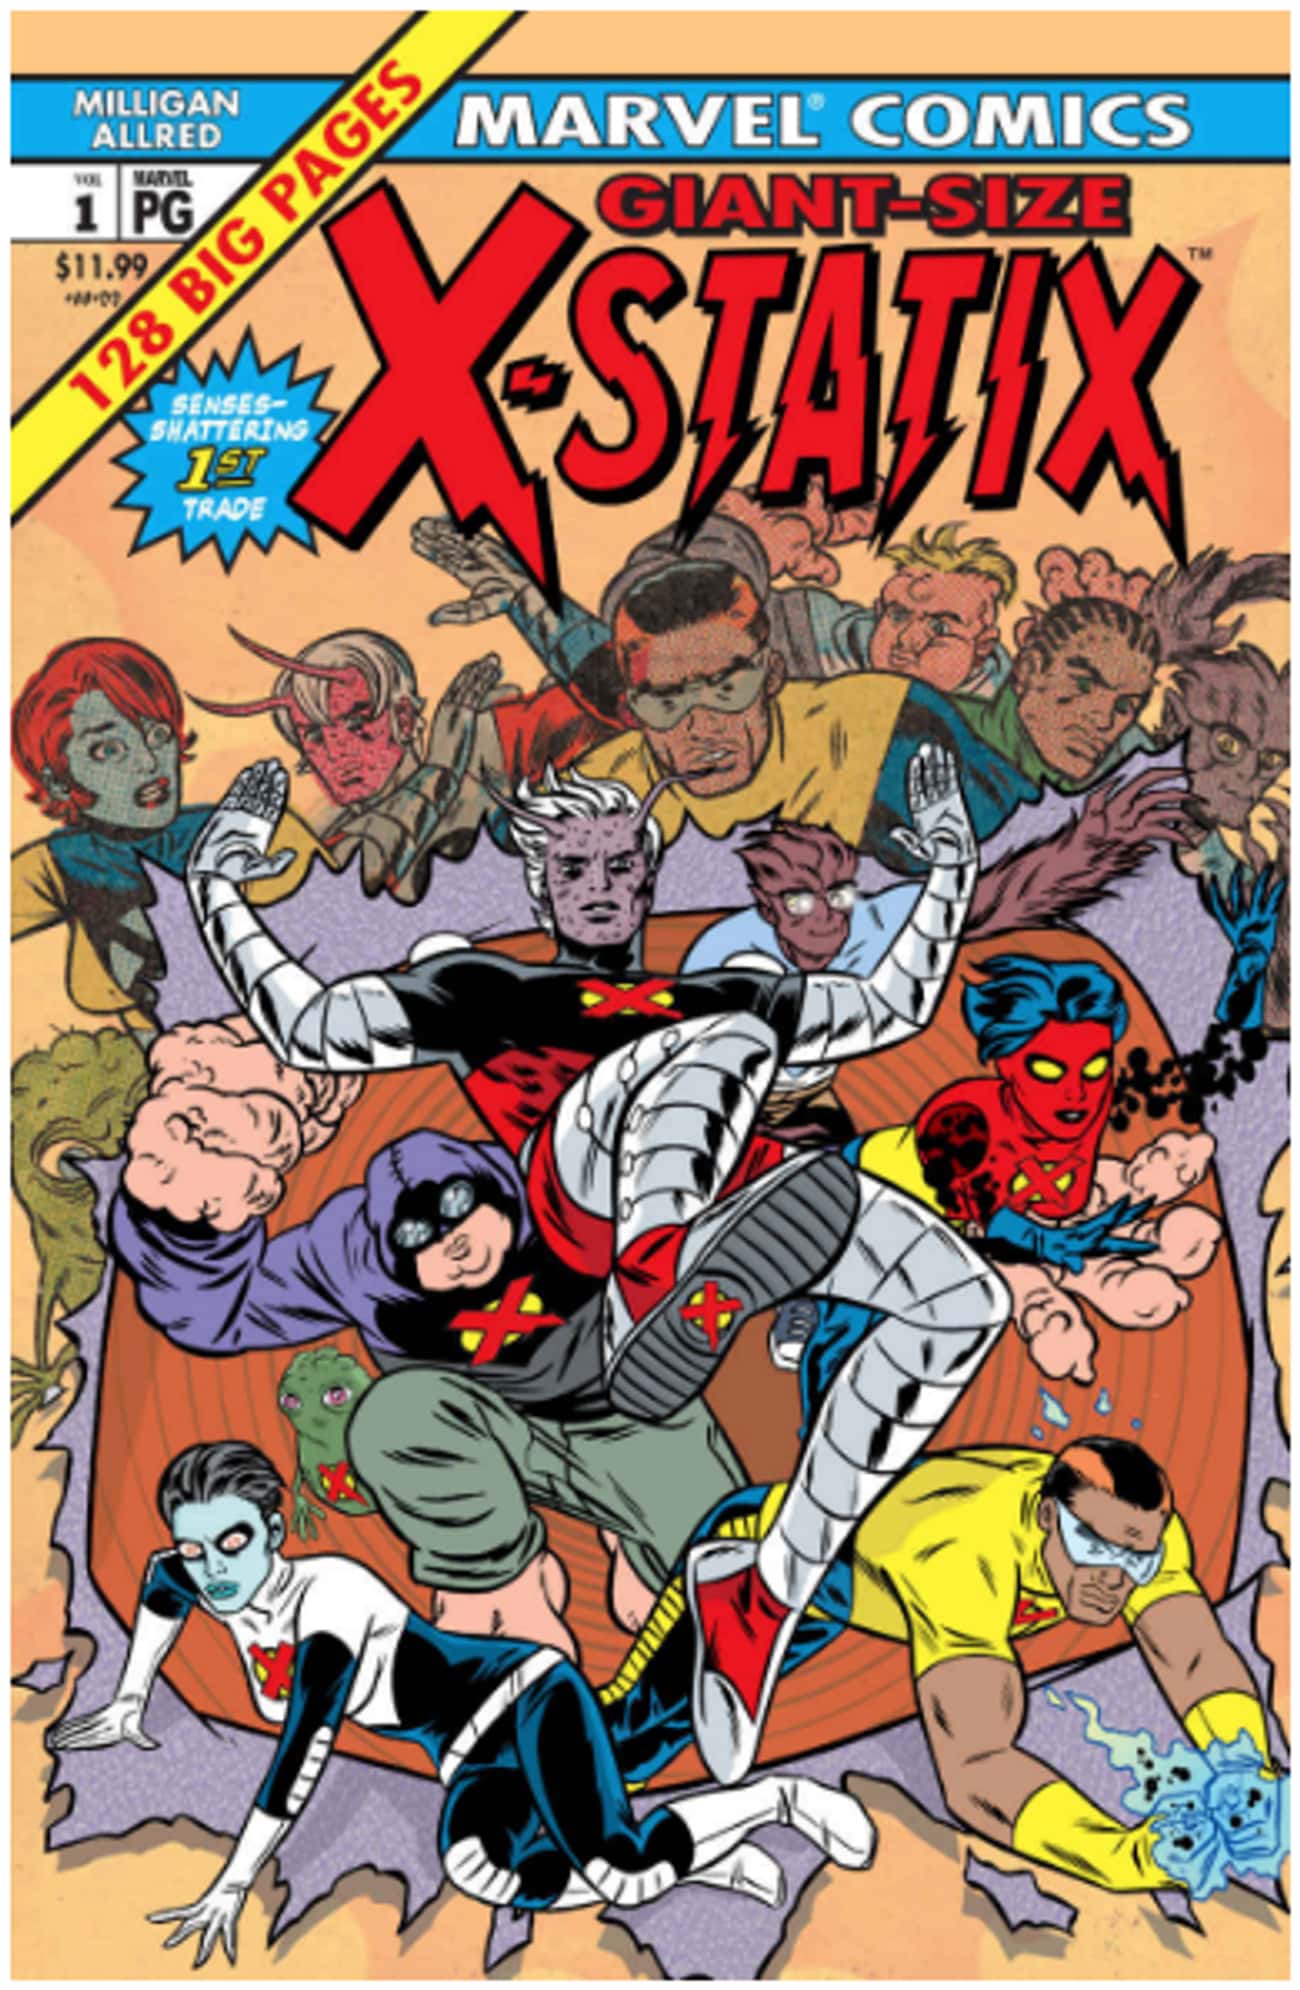 Phat and Vivisector from XStatix